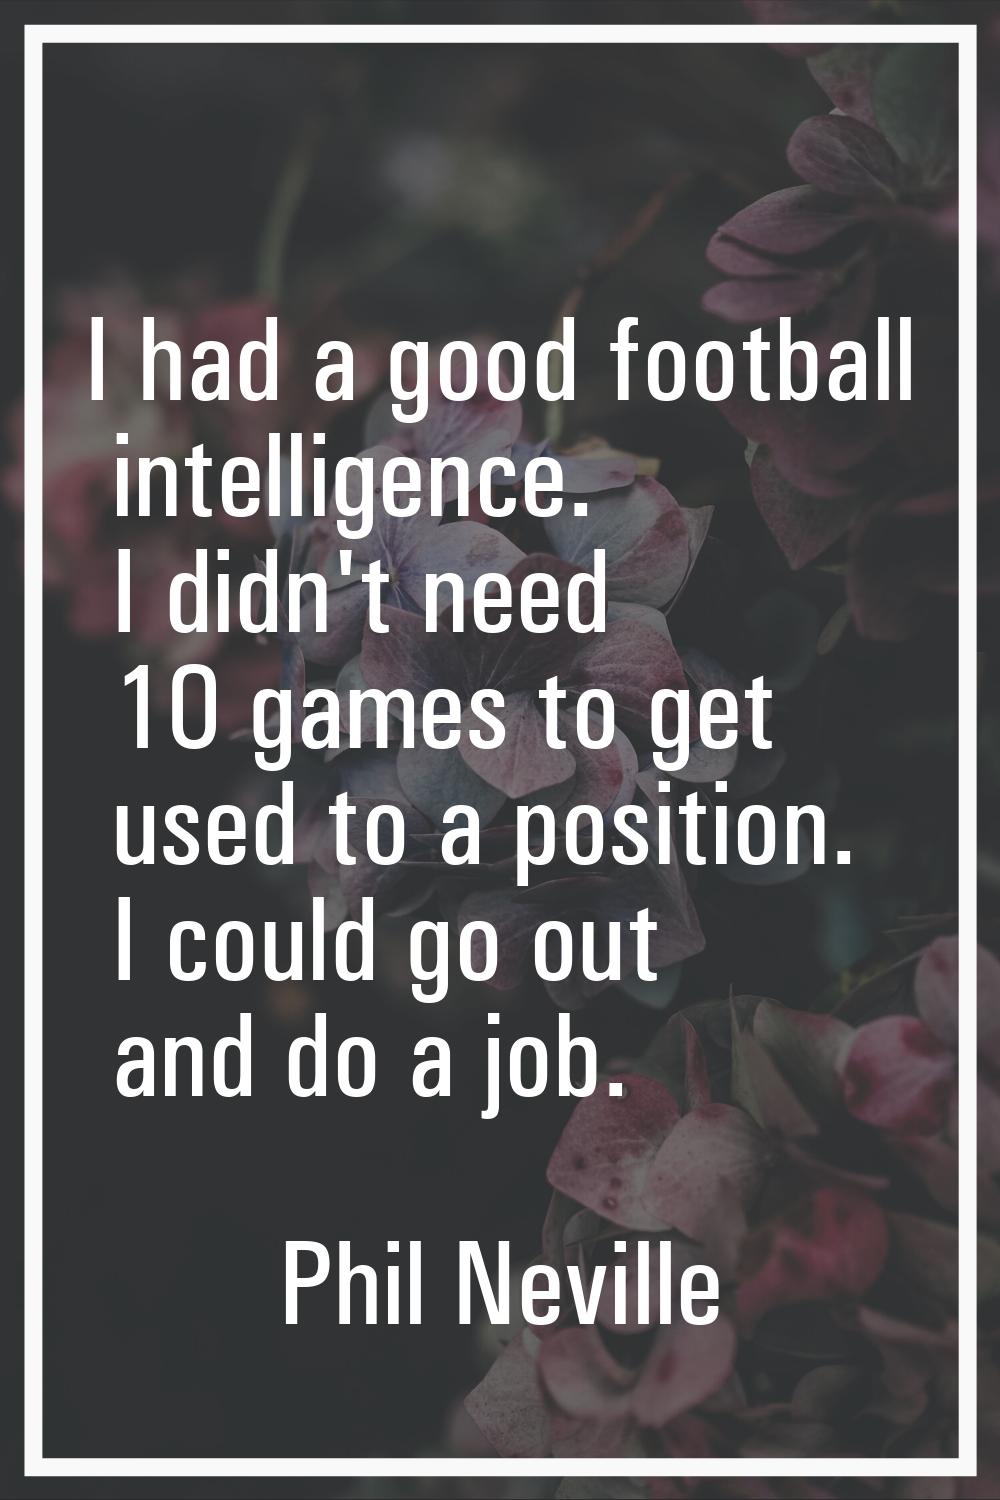 I had a good football intelligence. I didn't need 10 games to get used to a position. I could go ou